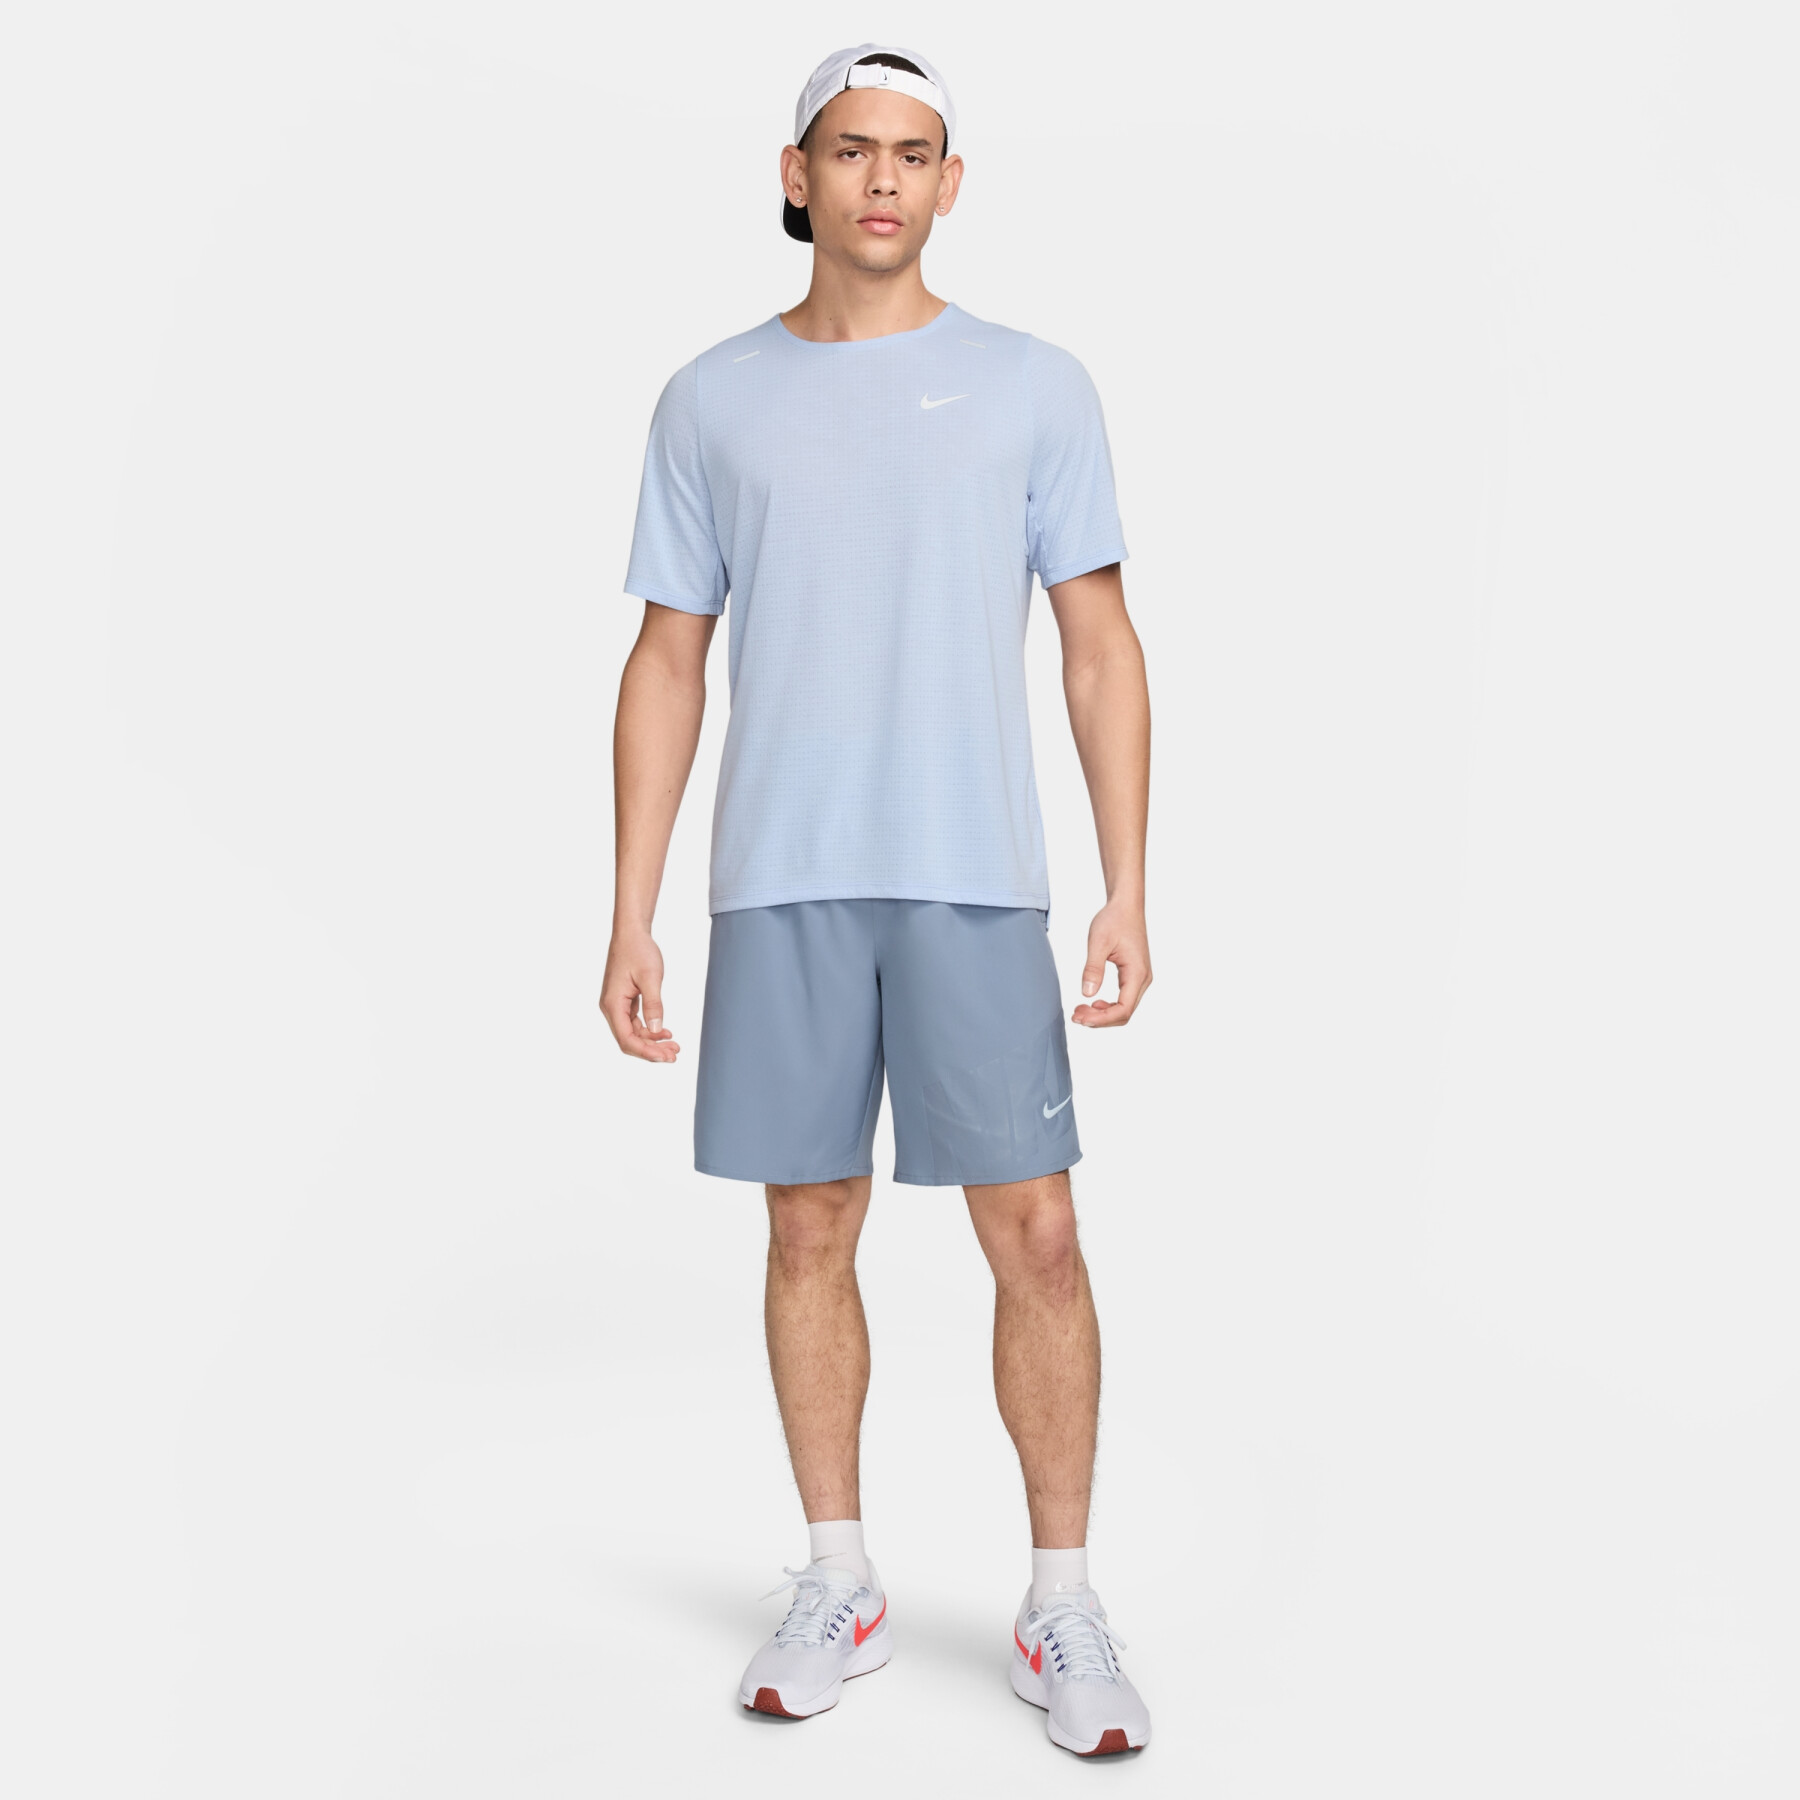 Shorts with integrated undershorts Nike Challenger Dri-FIT